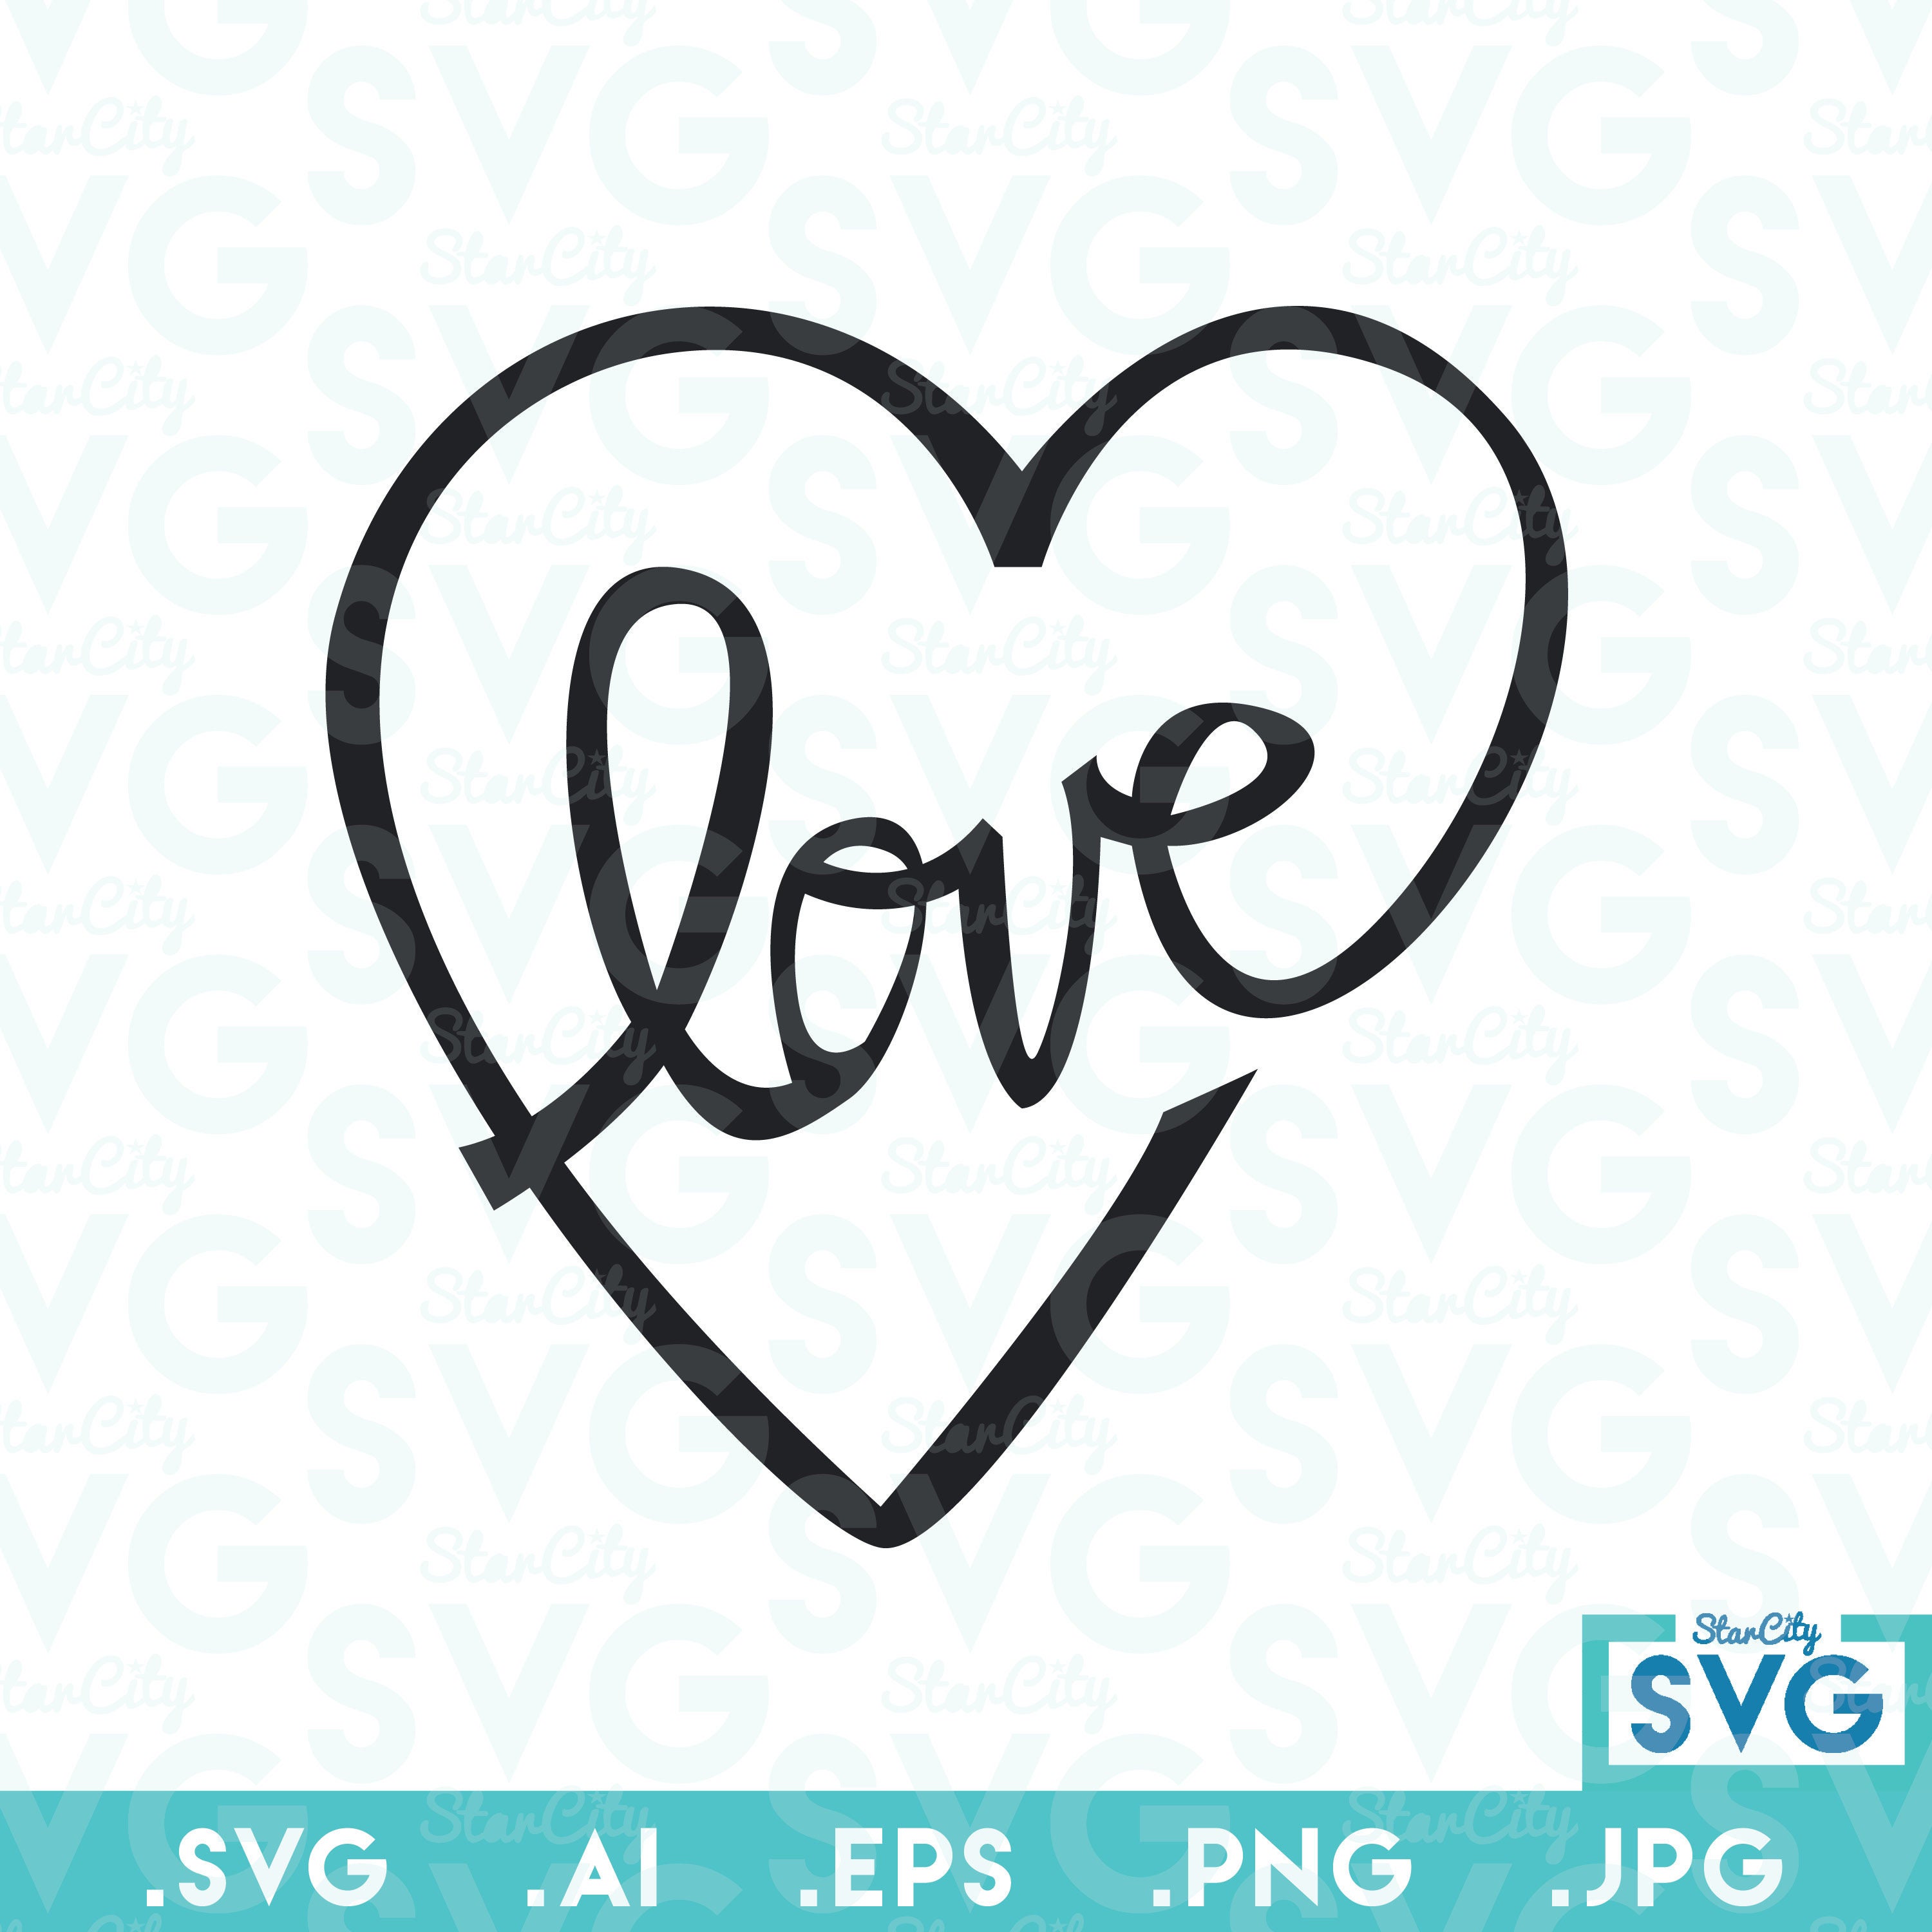 Download Love Vector file Vector cutting file SVG cutting file Love